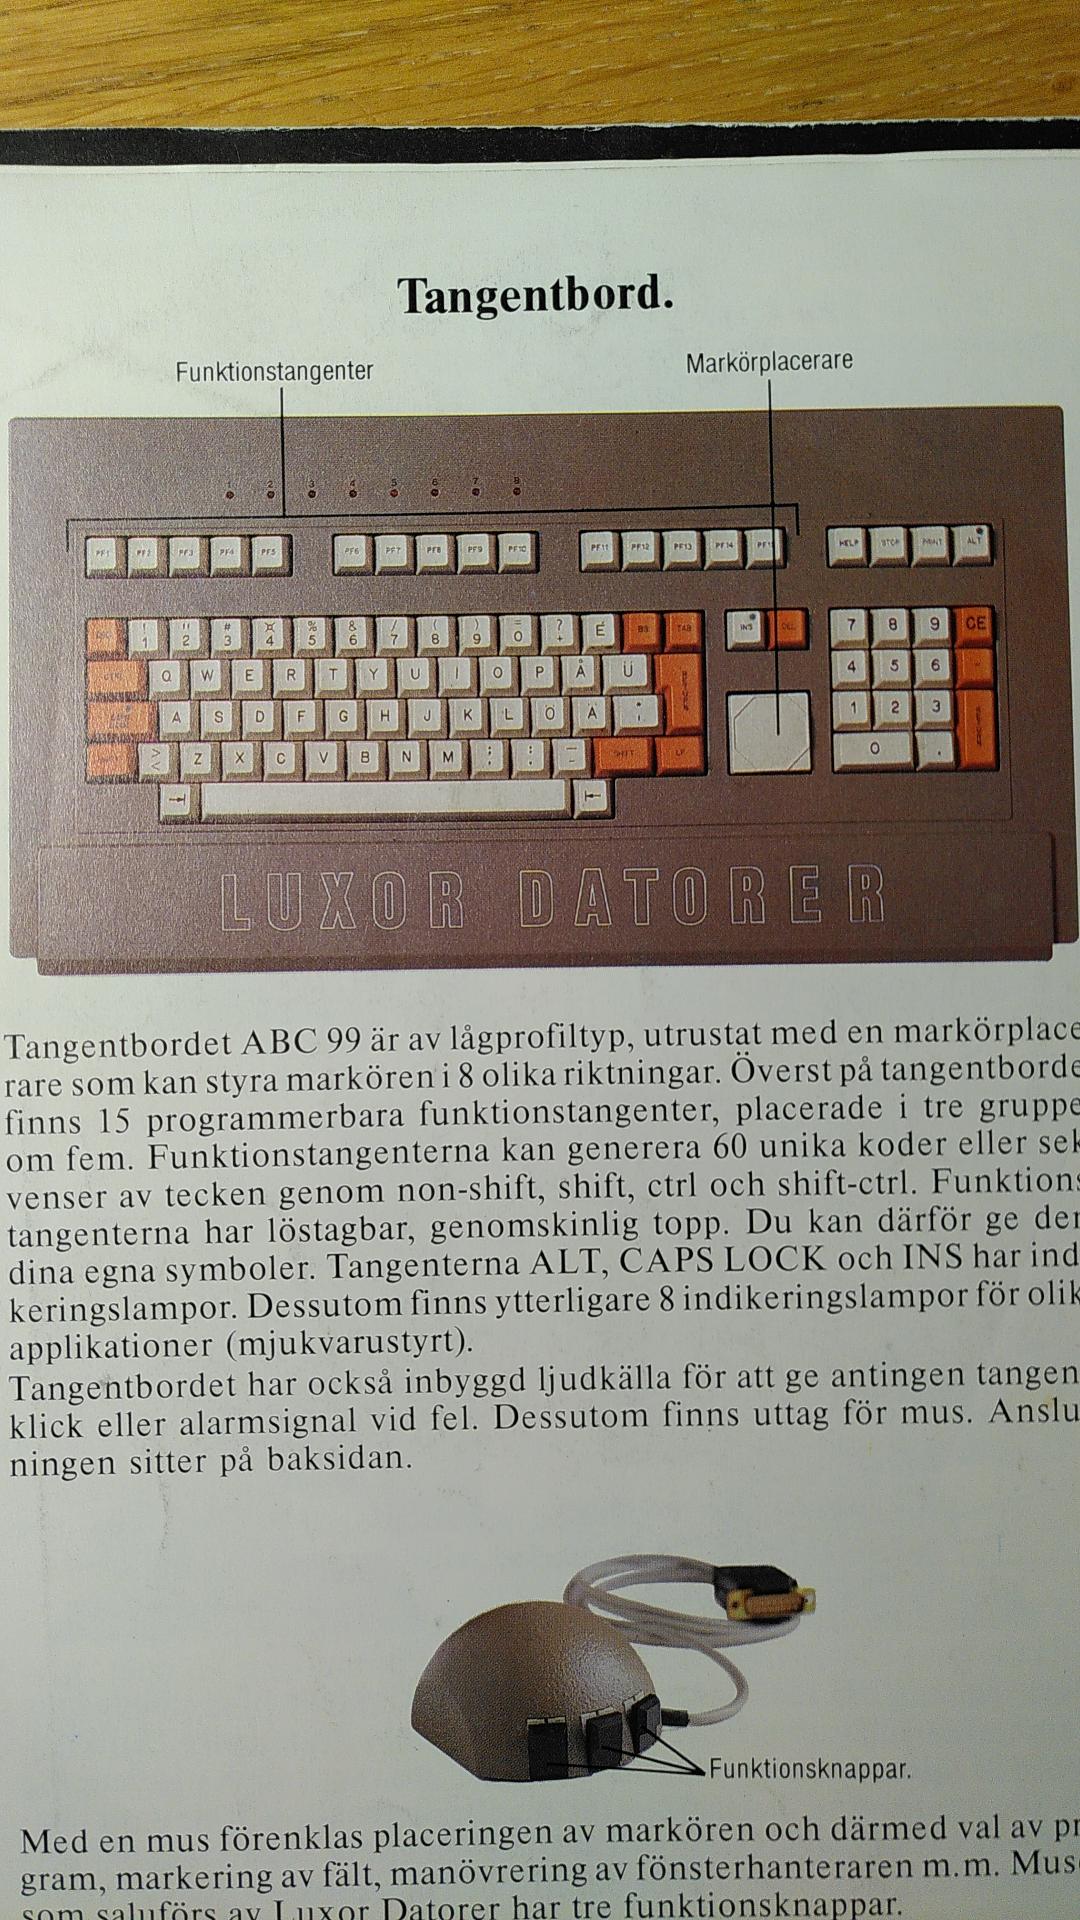 Brown Luxor ABC 1600 keyboard with white keys.